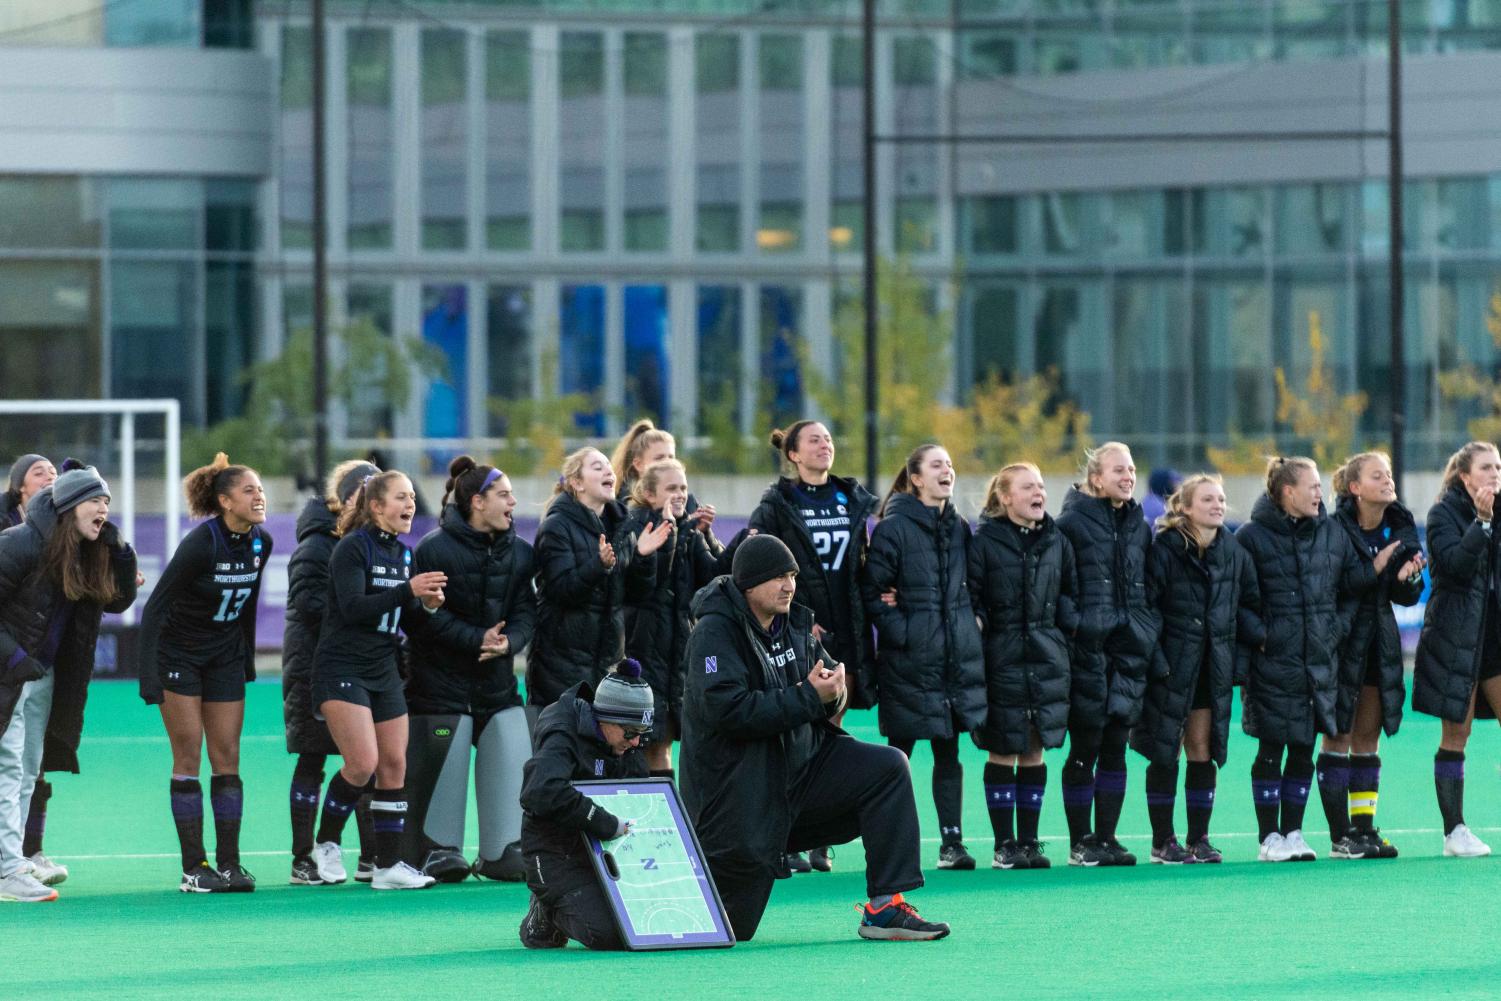 Two coaches, one holding a whiteboard, kneel in front of a row of athletes in black jerseys and black coats.